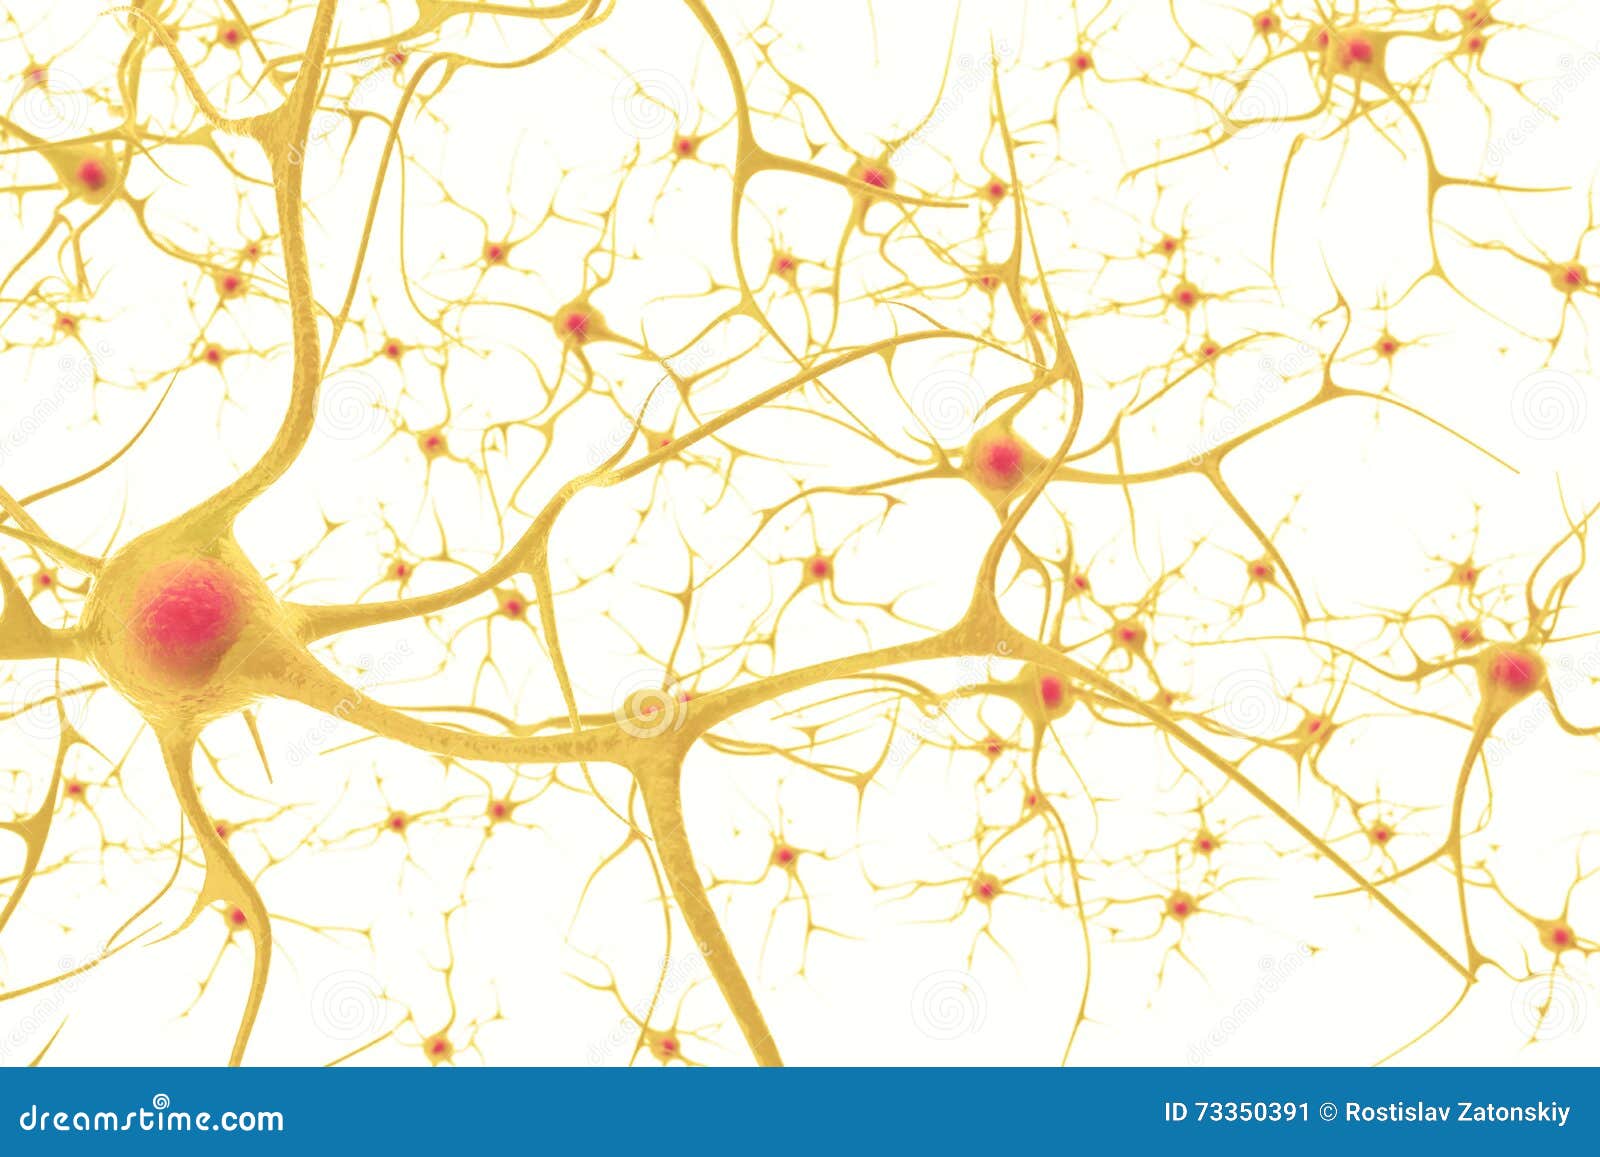 neurons in the human nervous system with the effect of depth field. 3d  on a white background